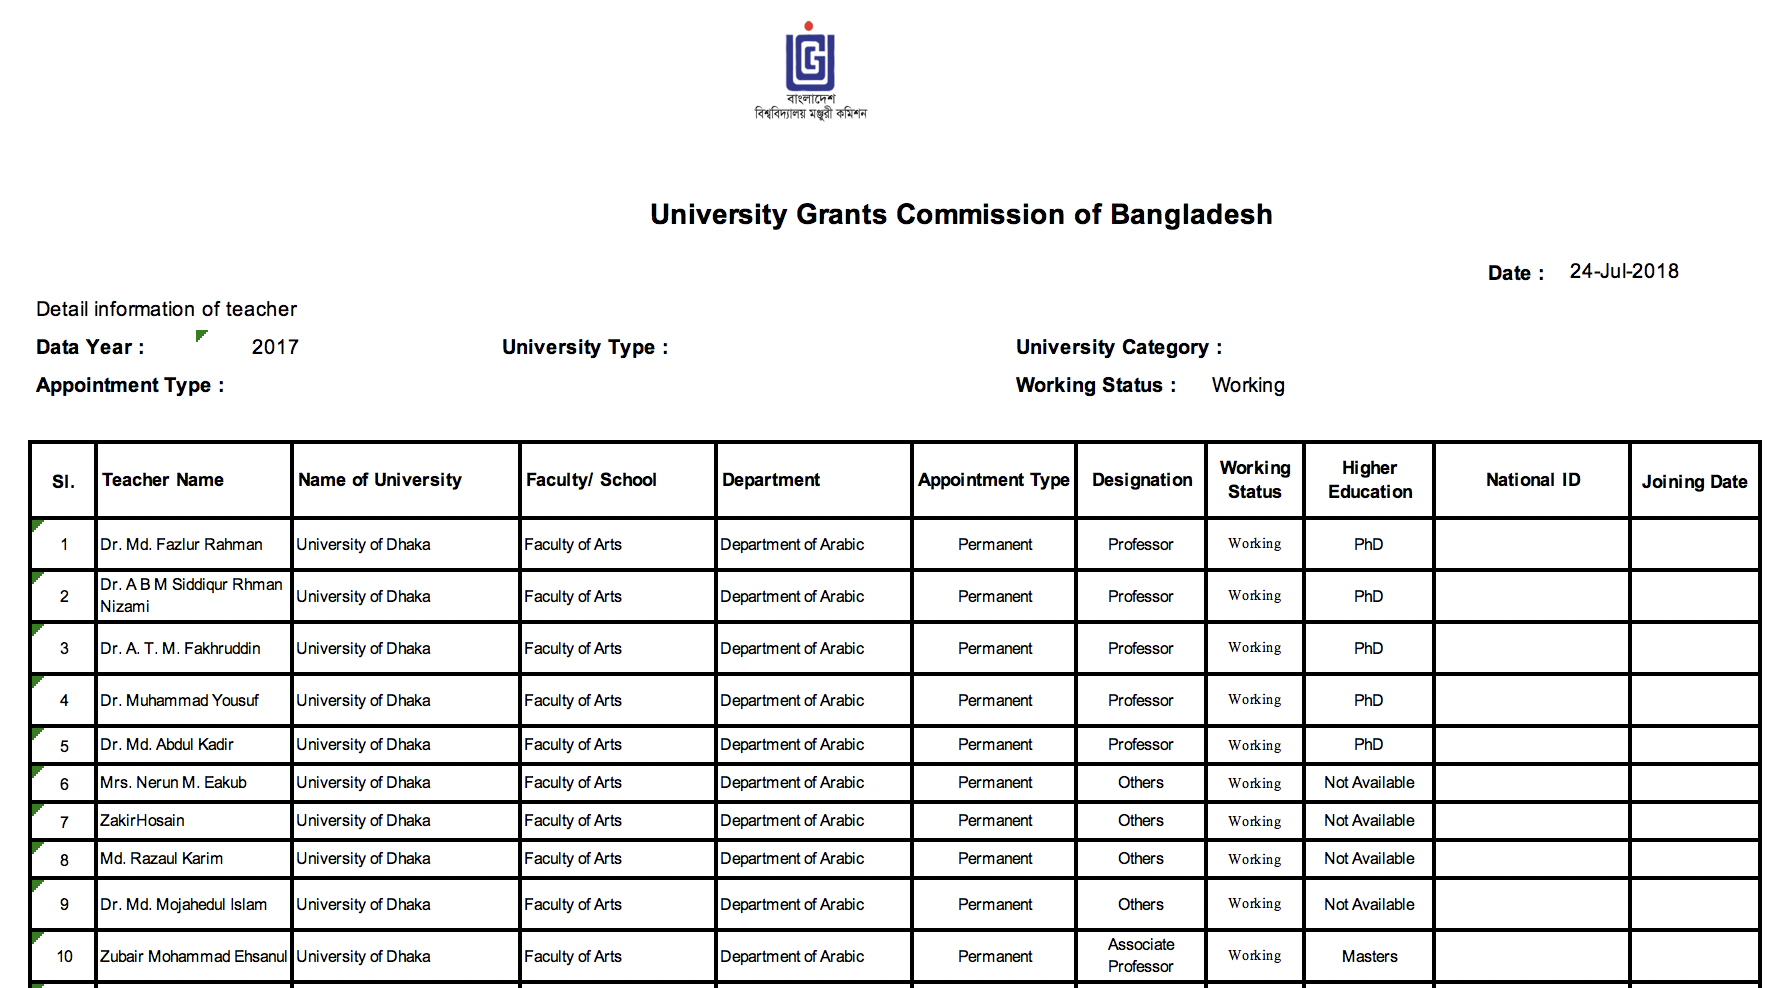 Detail Information of Teachers at DU (2017): University Grants Commission of Bangladesh, Report Dated Jul 24, 2018. Data extracted on Sep 9, 2018 from www.data.gov.bd